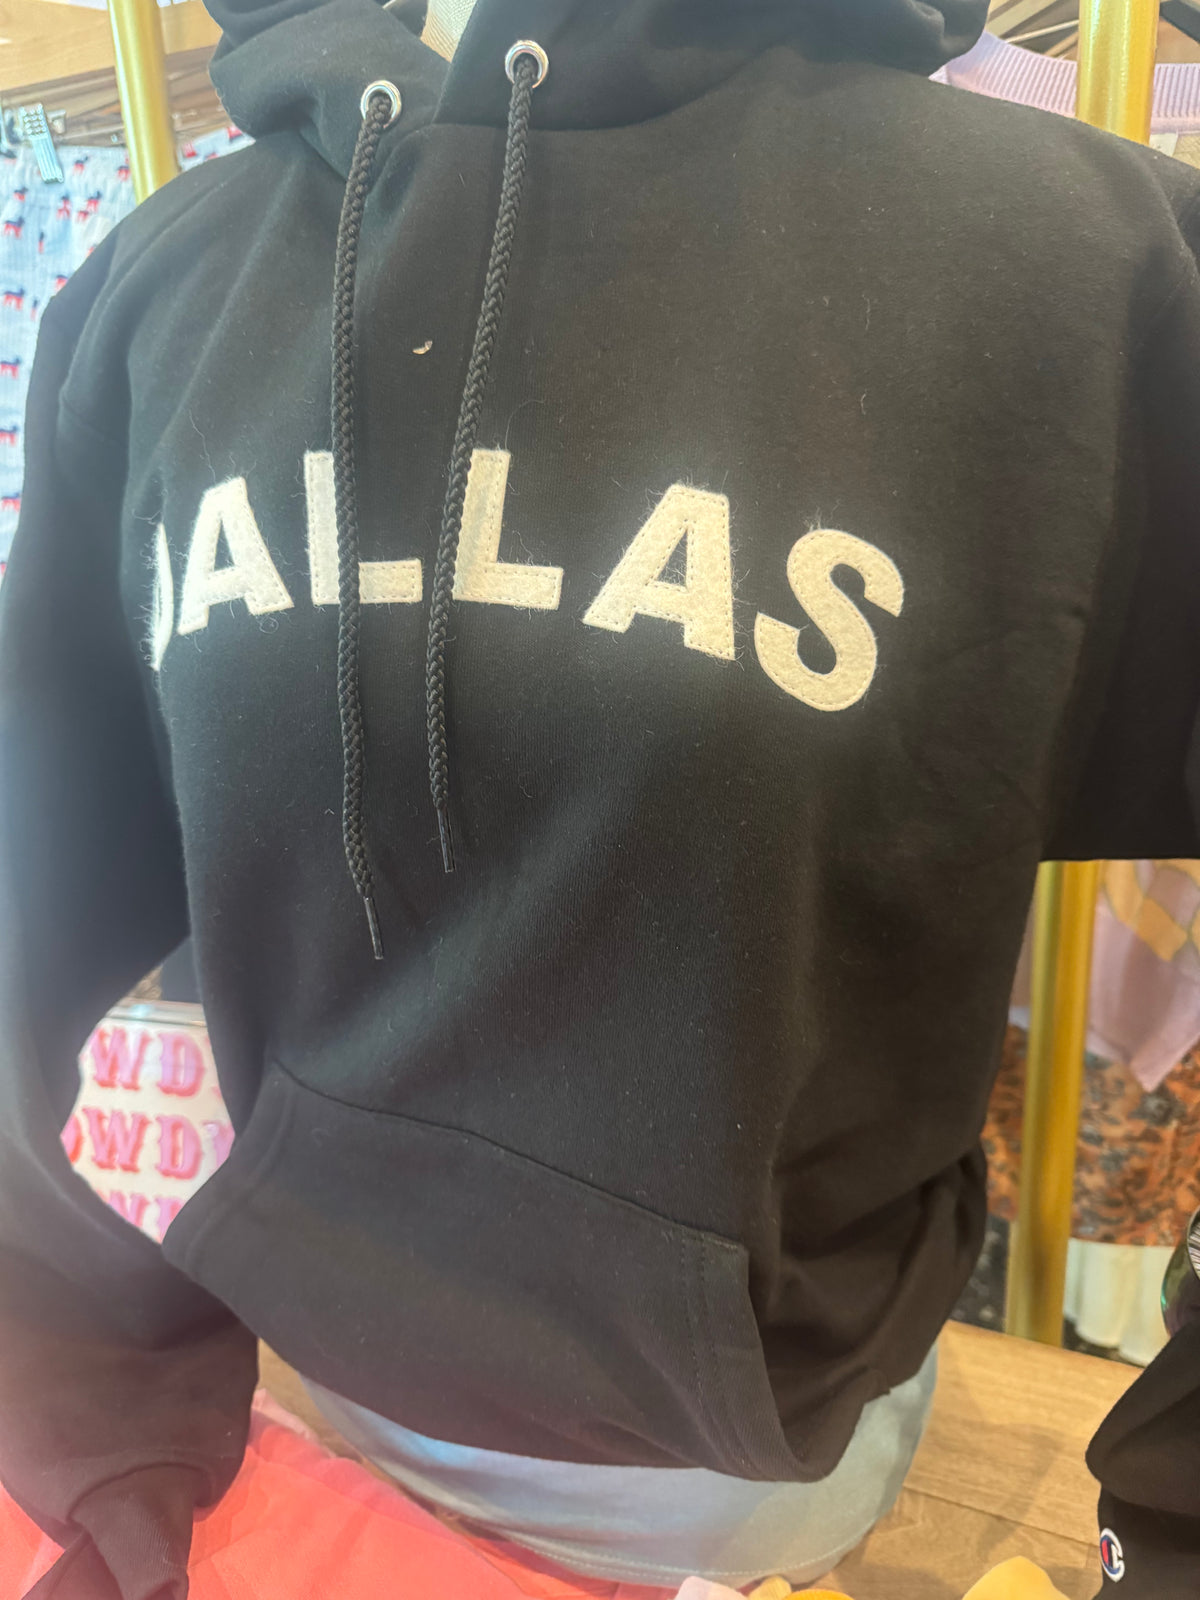 Dallas Hoodie Black - Hand sewed letters with pegasus patch